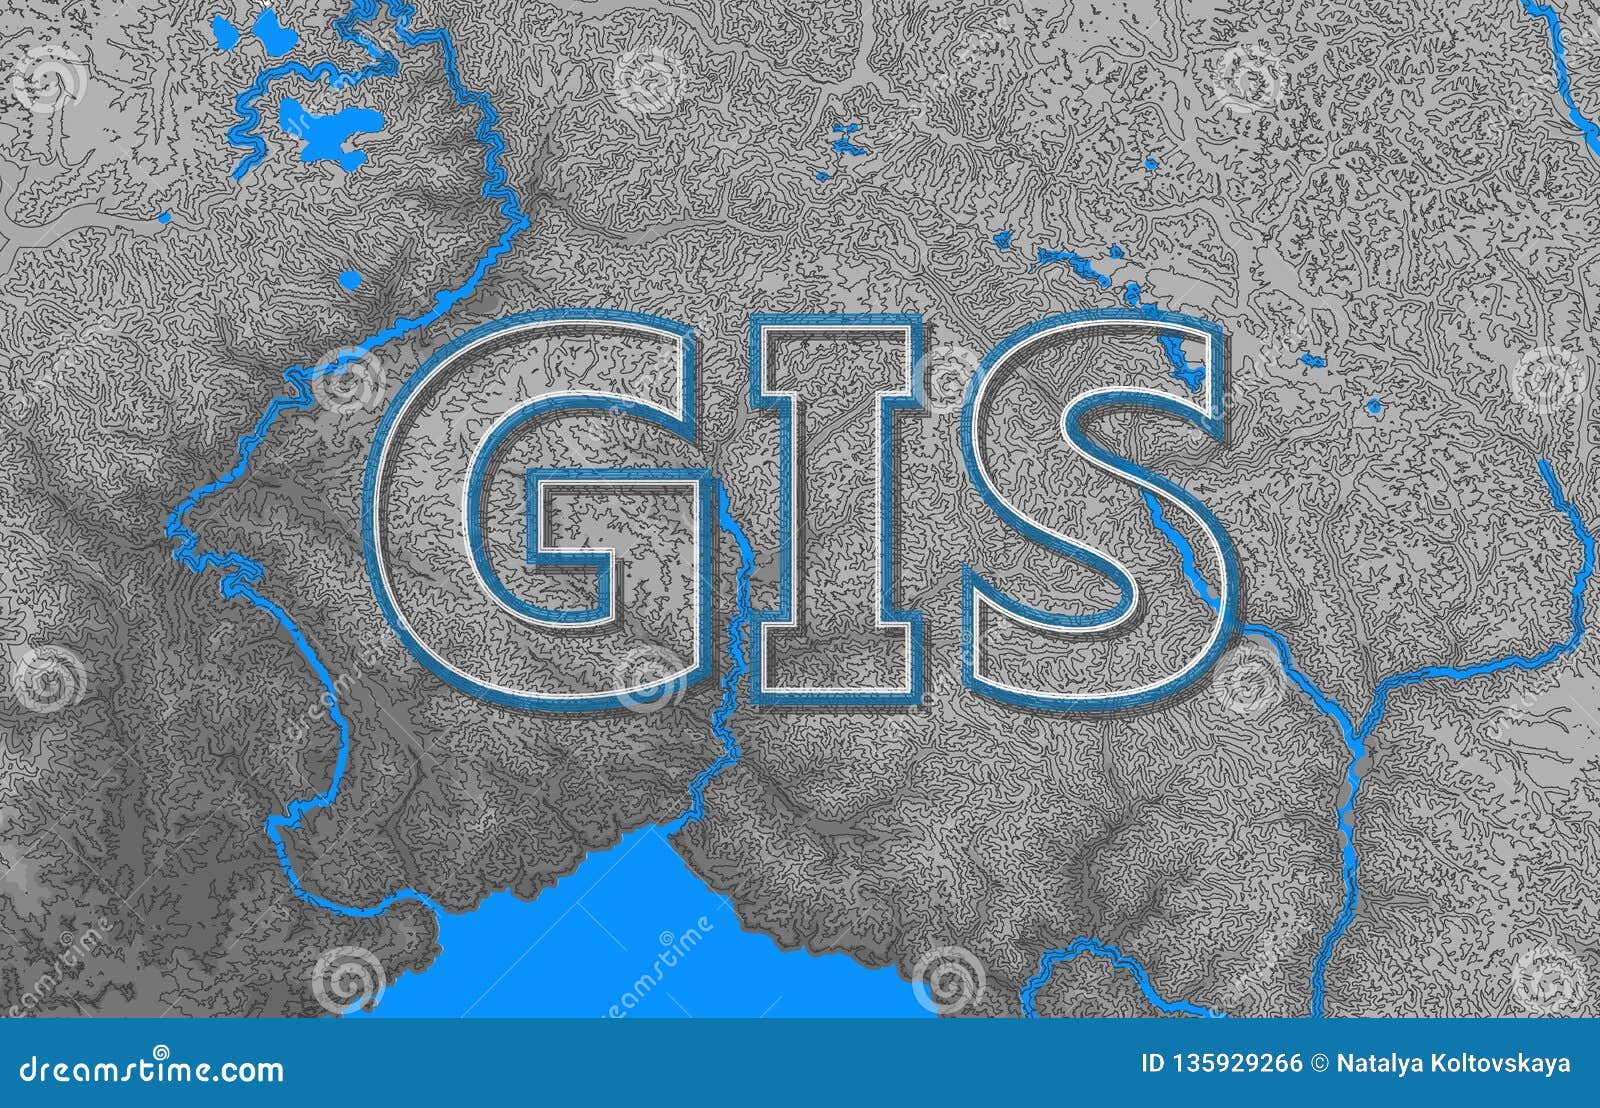 geographic information systems, gis, cartography and mapping. web mapping